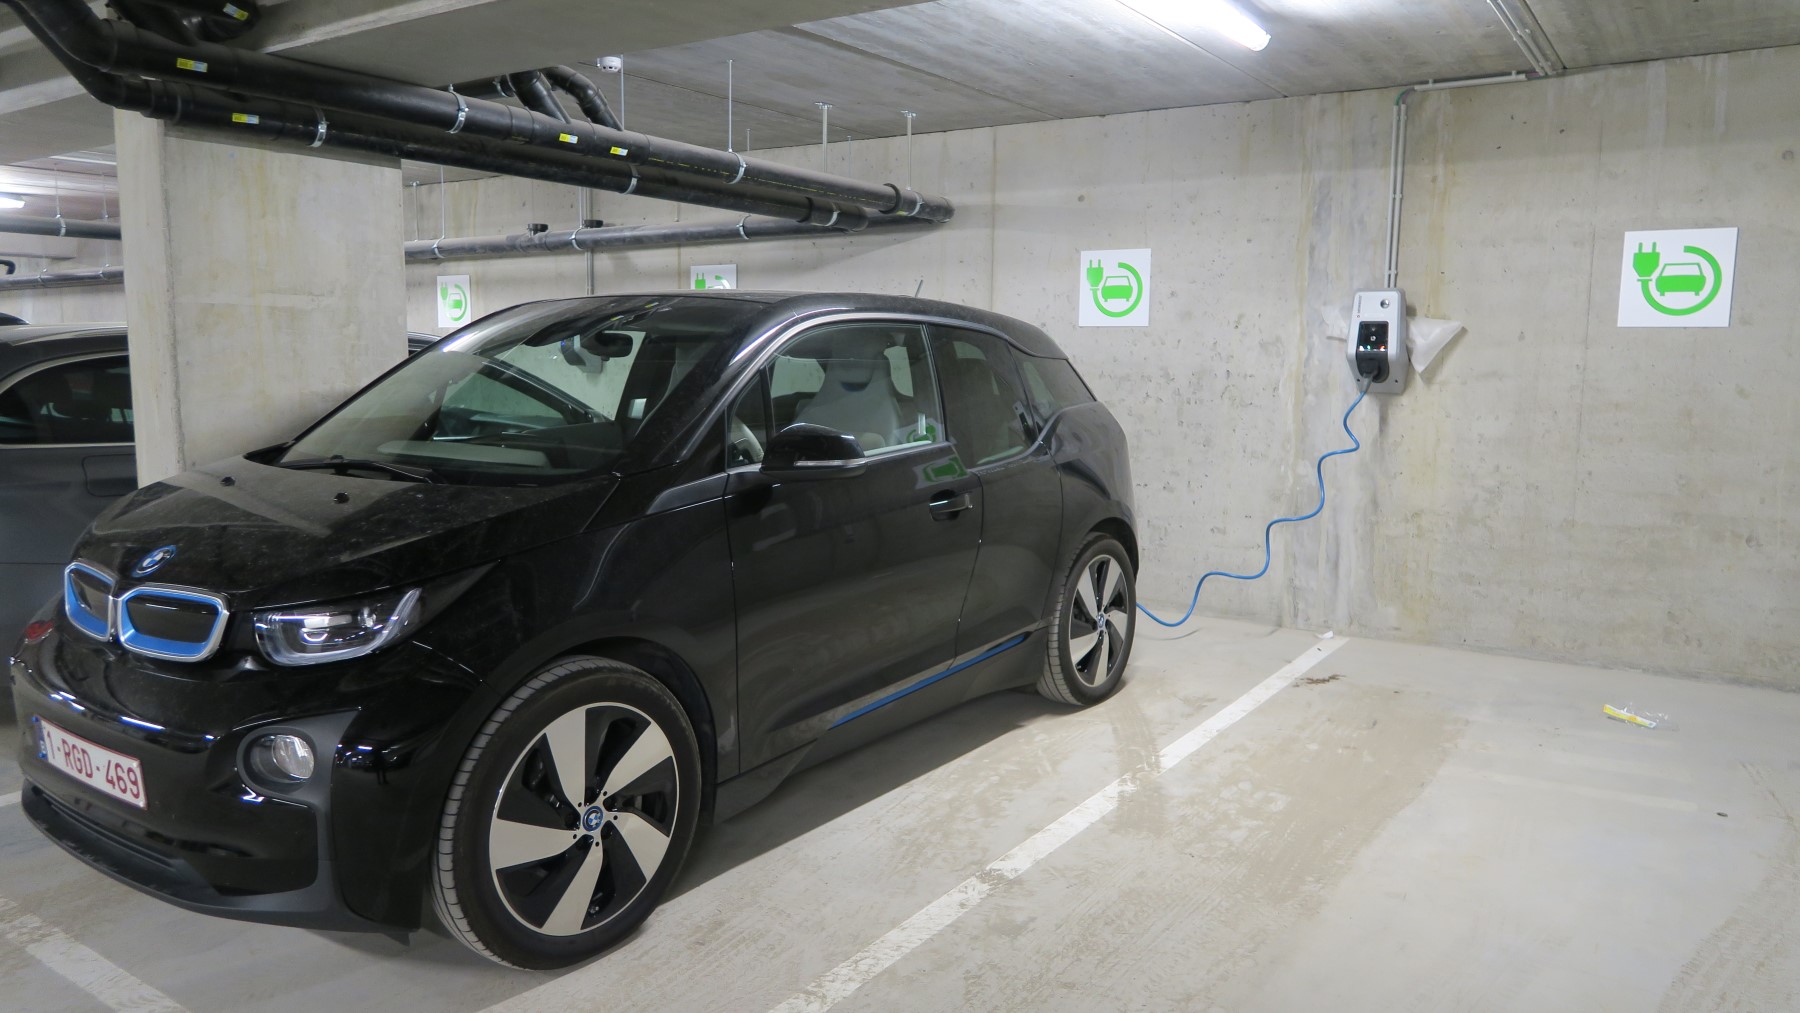 Electric Car Station | Electric Car Charging | Electric Car Charger | Car Charge Point | WiFi Enabled Electric Vehicle (EV) Charger | Electric Vehicle (EV) Charger | Solar Electric Car Station | Solar Electric Car Charging | Solar Electric Car Charger | Solar Car Charge Point | Solar WiFi Enabled Electric Vehicle (EV) Charger | Solar Electric Vehicle (EV) Charger.